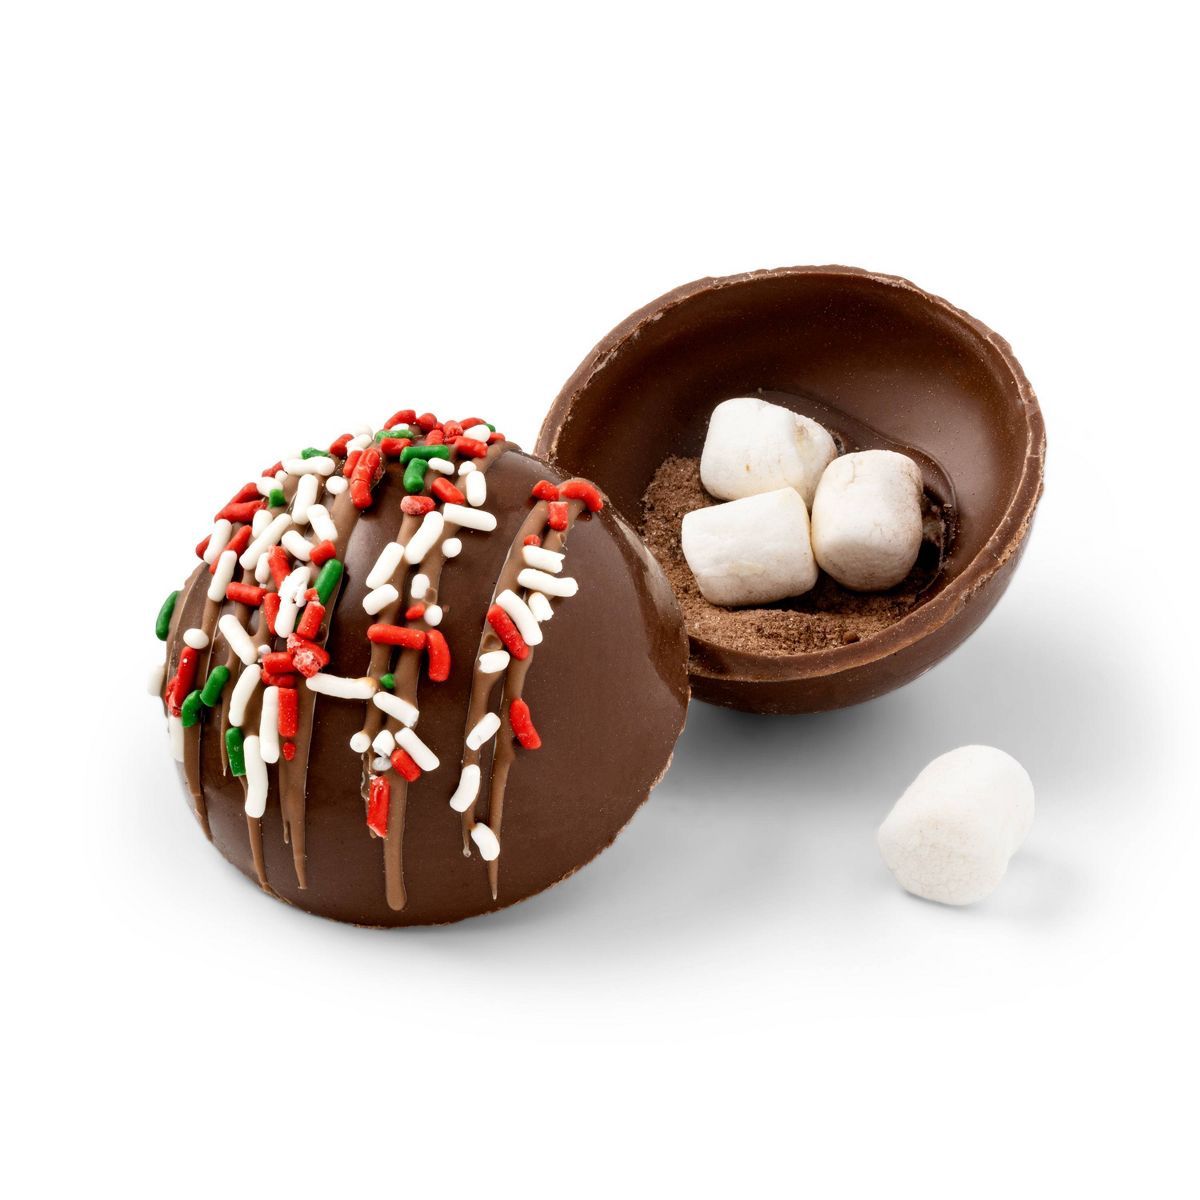 Holiday Hot Chocolate Drink Bomb - Belgian Milk Chocolate Topped with Sprinkles - 1.6oz/1ct - Fav... | Target